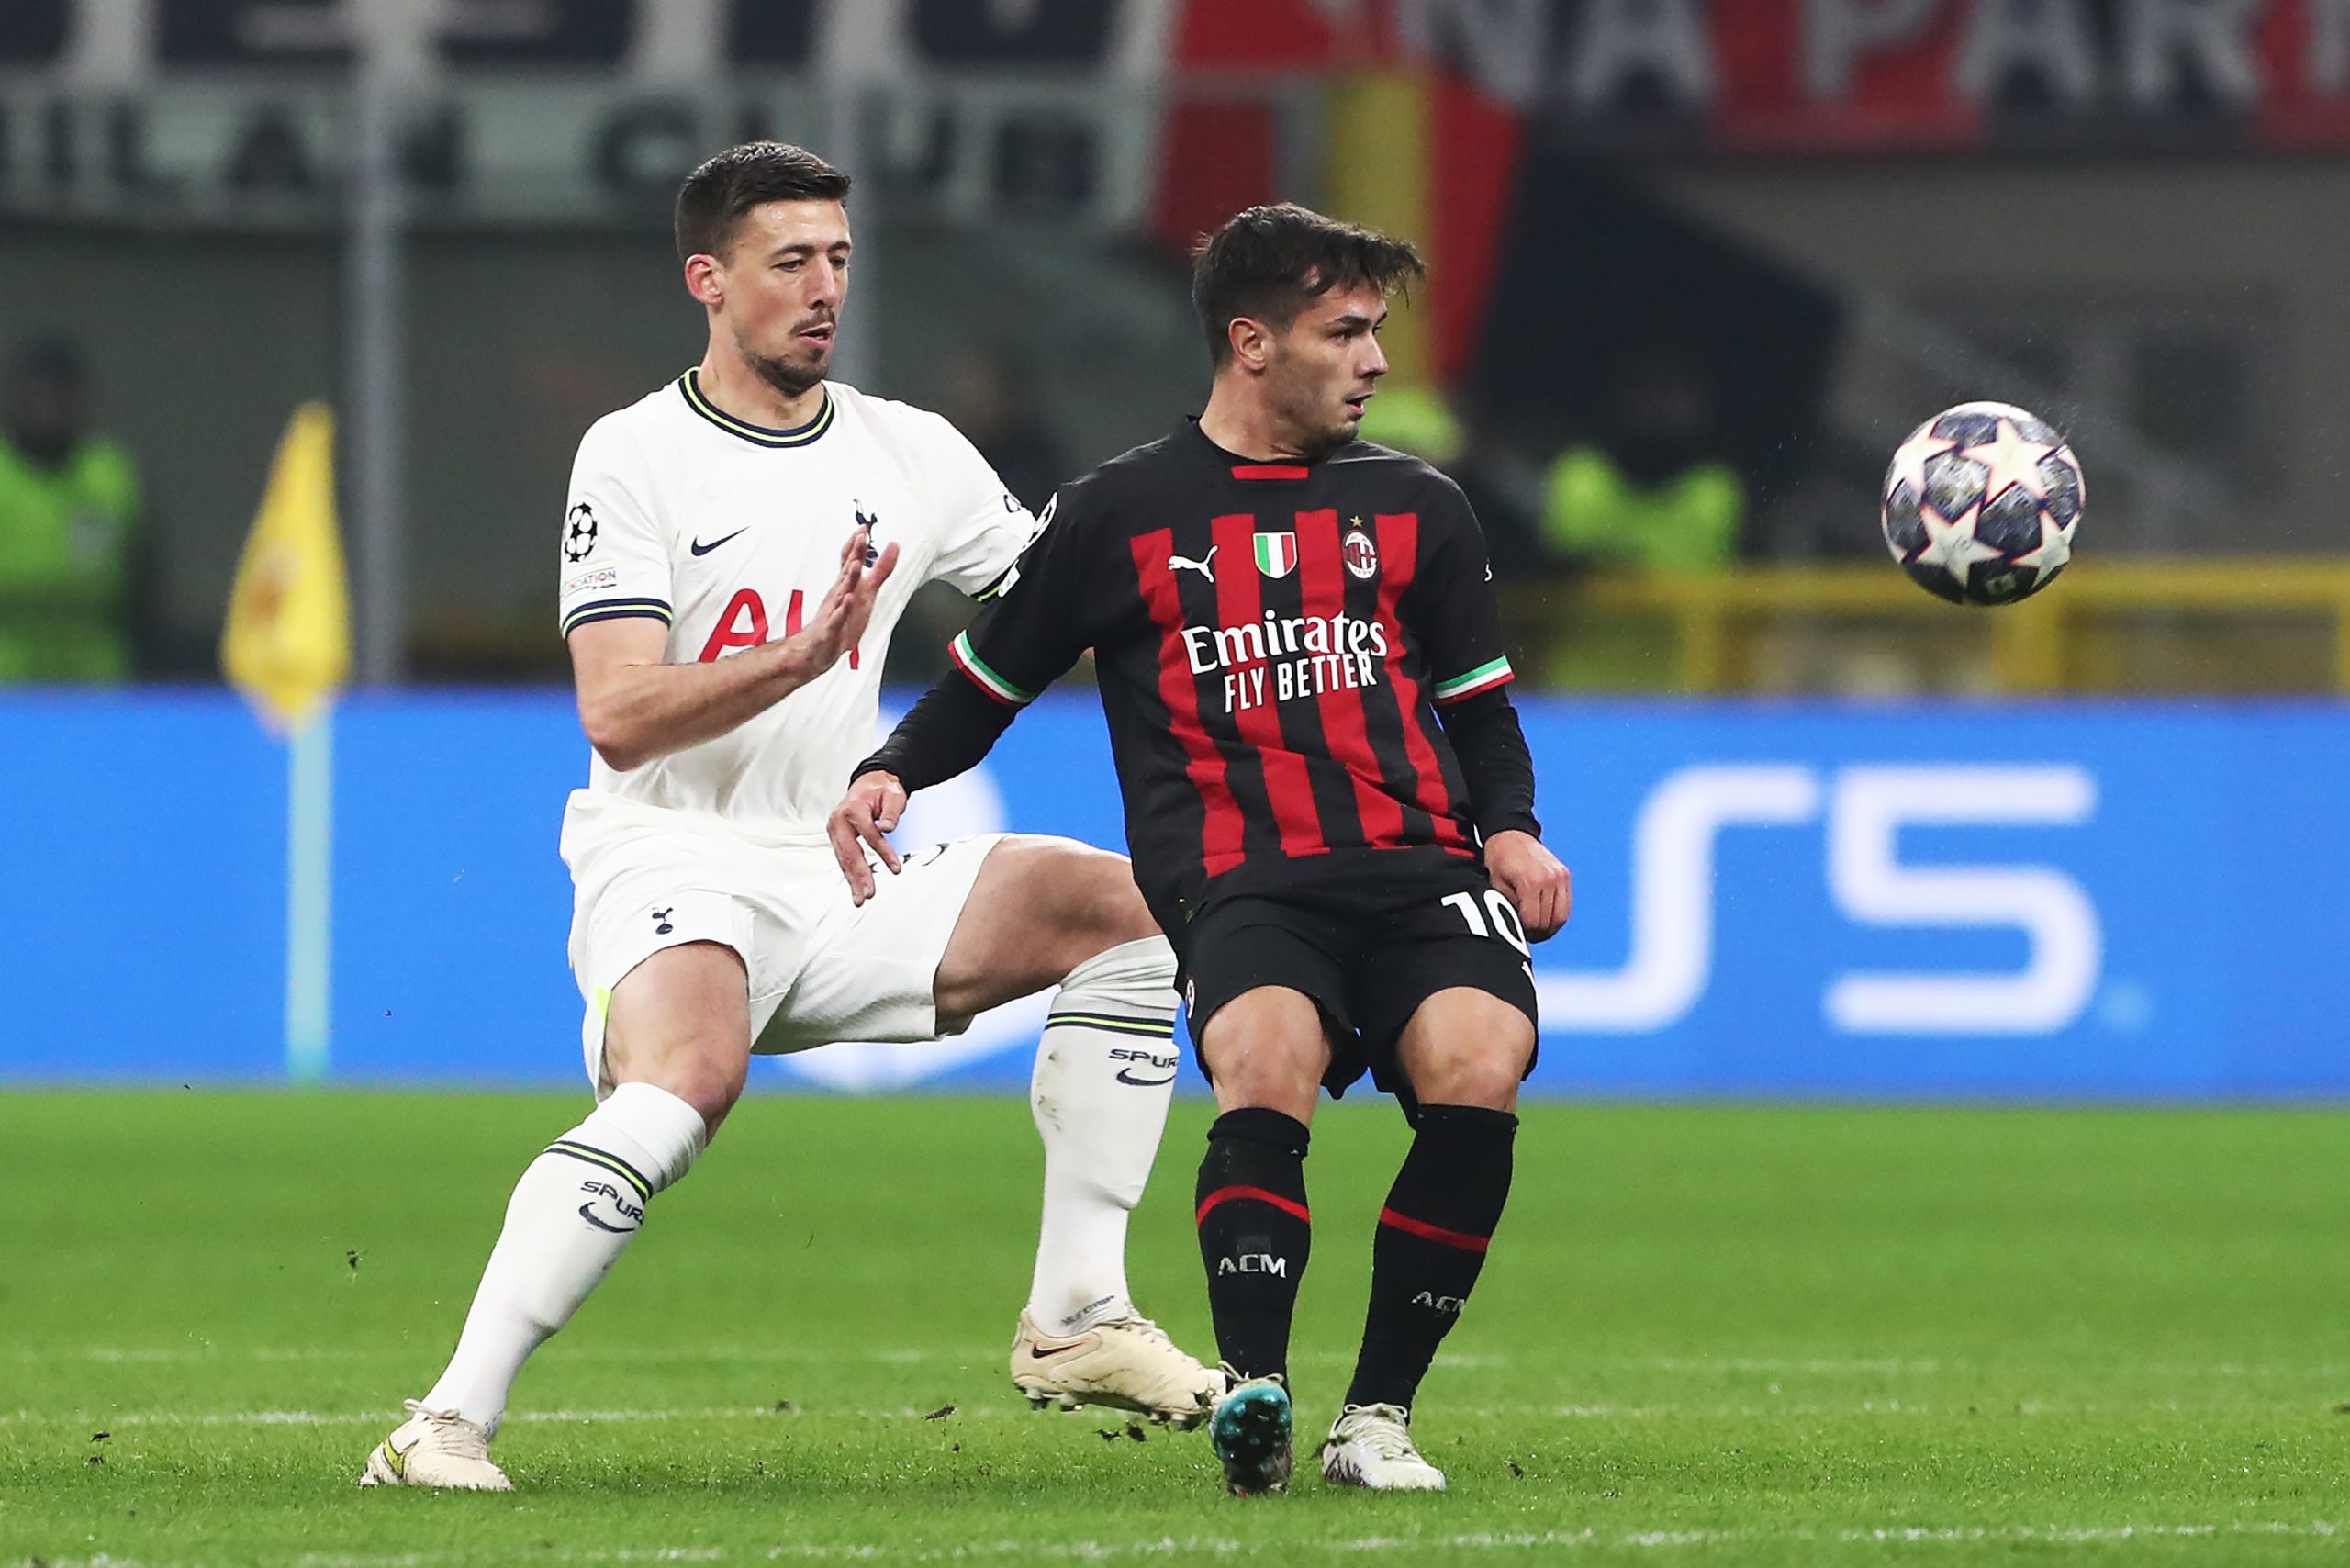 Brahim Diaz of AC Milan is challenged by Clement Lenglet of Tottenham Hotspur.